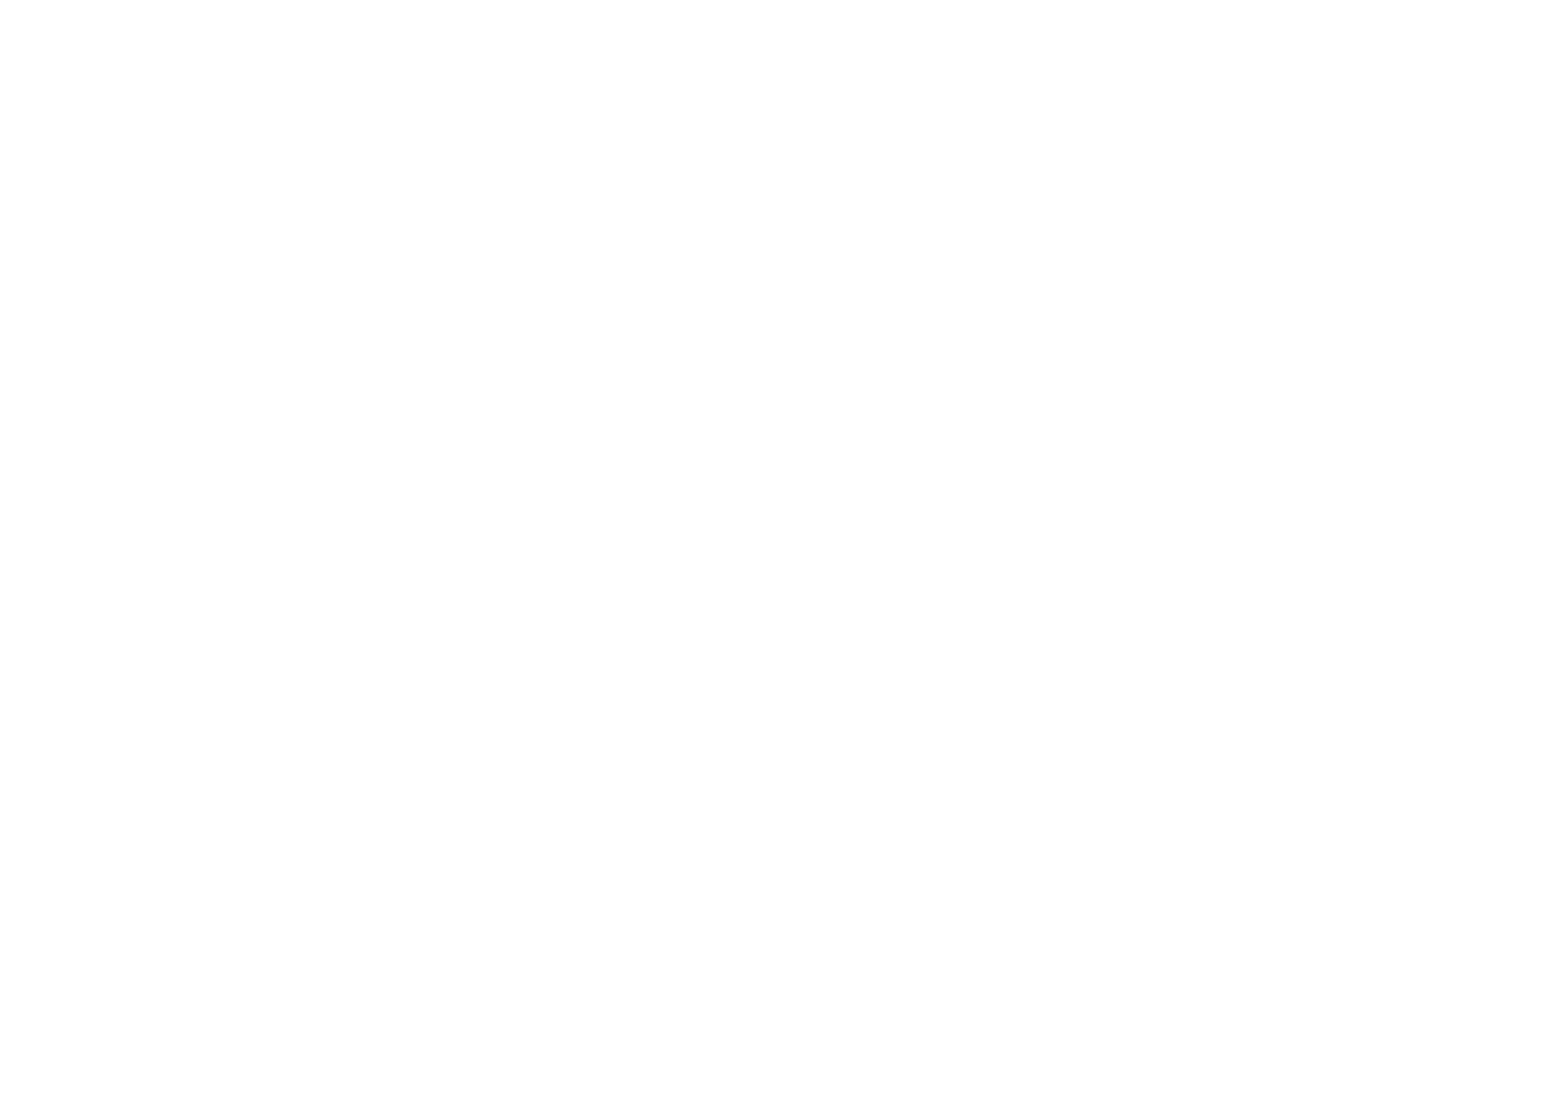 commercial roofer dallas tx dfw tpo flat epdm roof repair free inspection best companies near me services texas elite commercial roofing